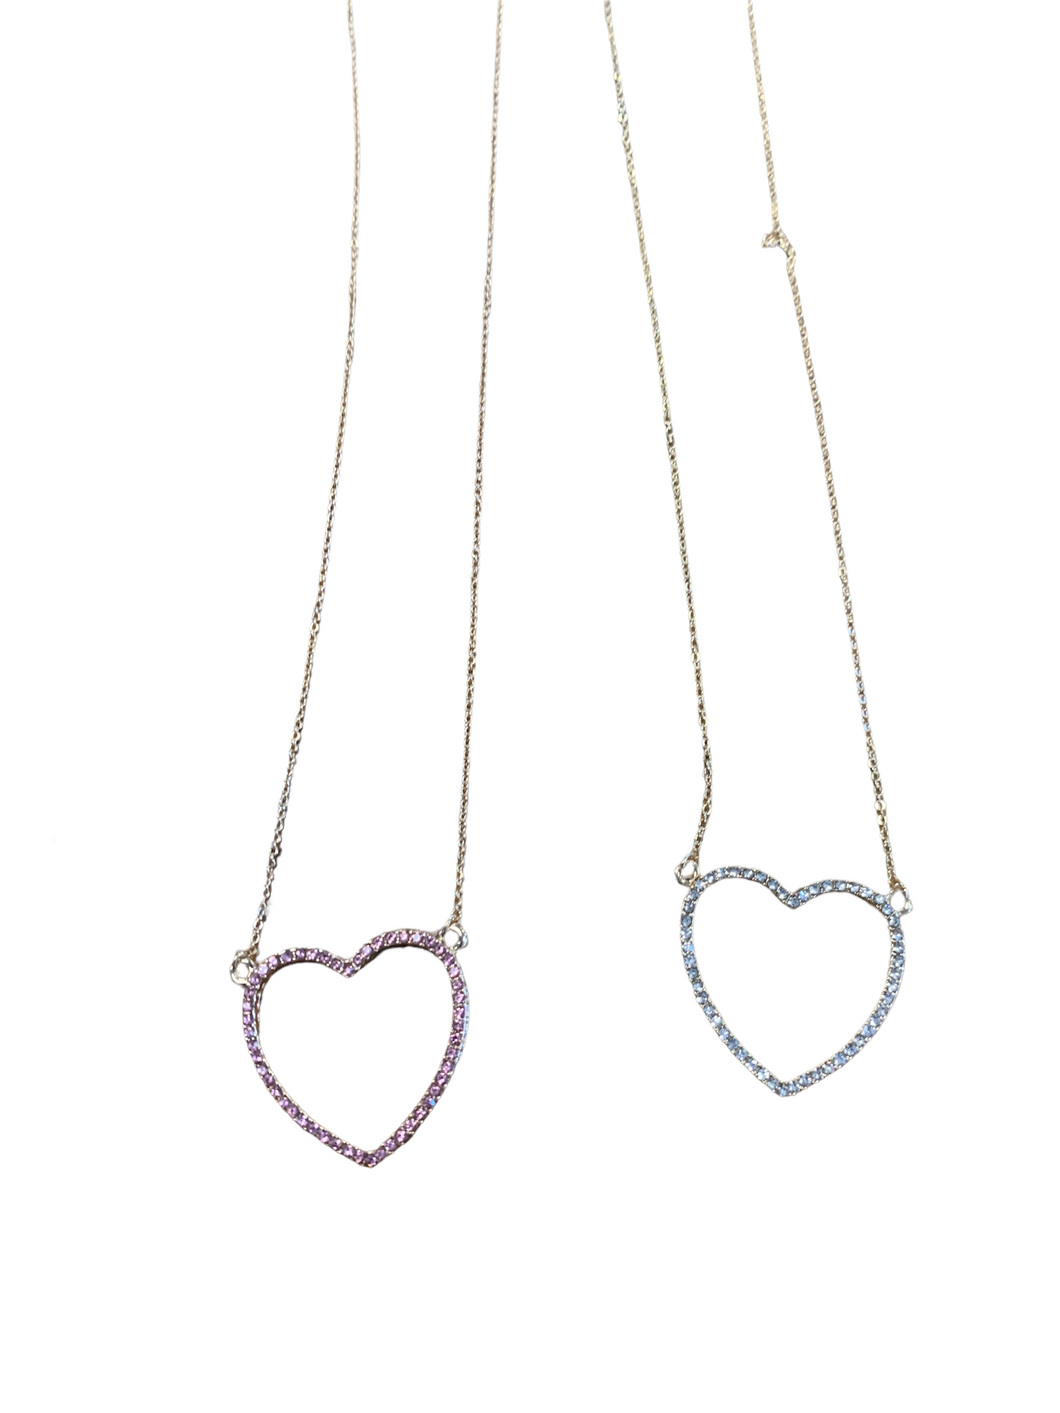 Crystal Heart Dainty Necklace- Multiple Colors